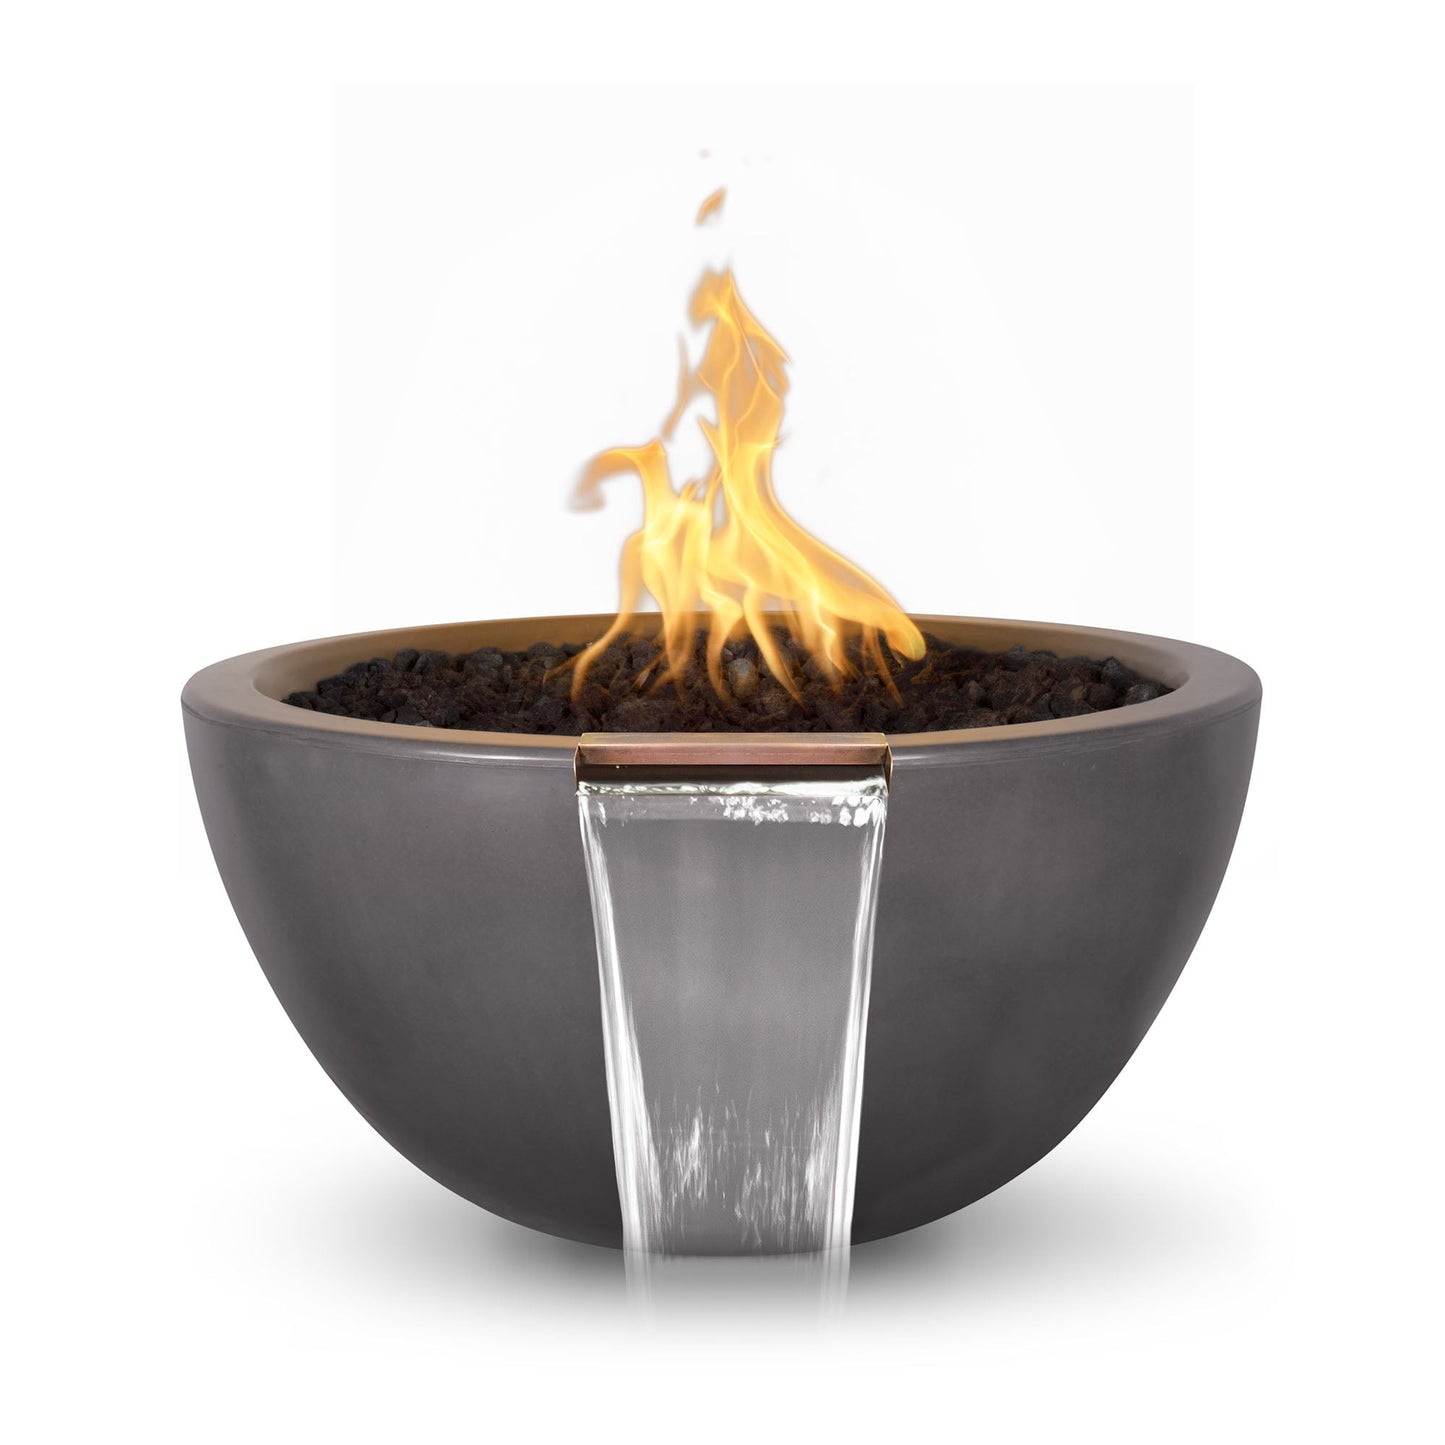 The Outdoor Plus Round Luna 38" Metallic Copper GFRC Concrete Liquid Propane Fire & Water Bowl with Match Lit with Flame Sense Ignition